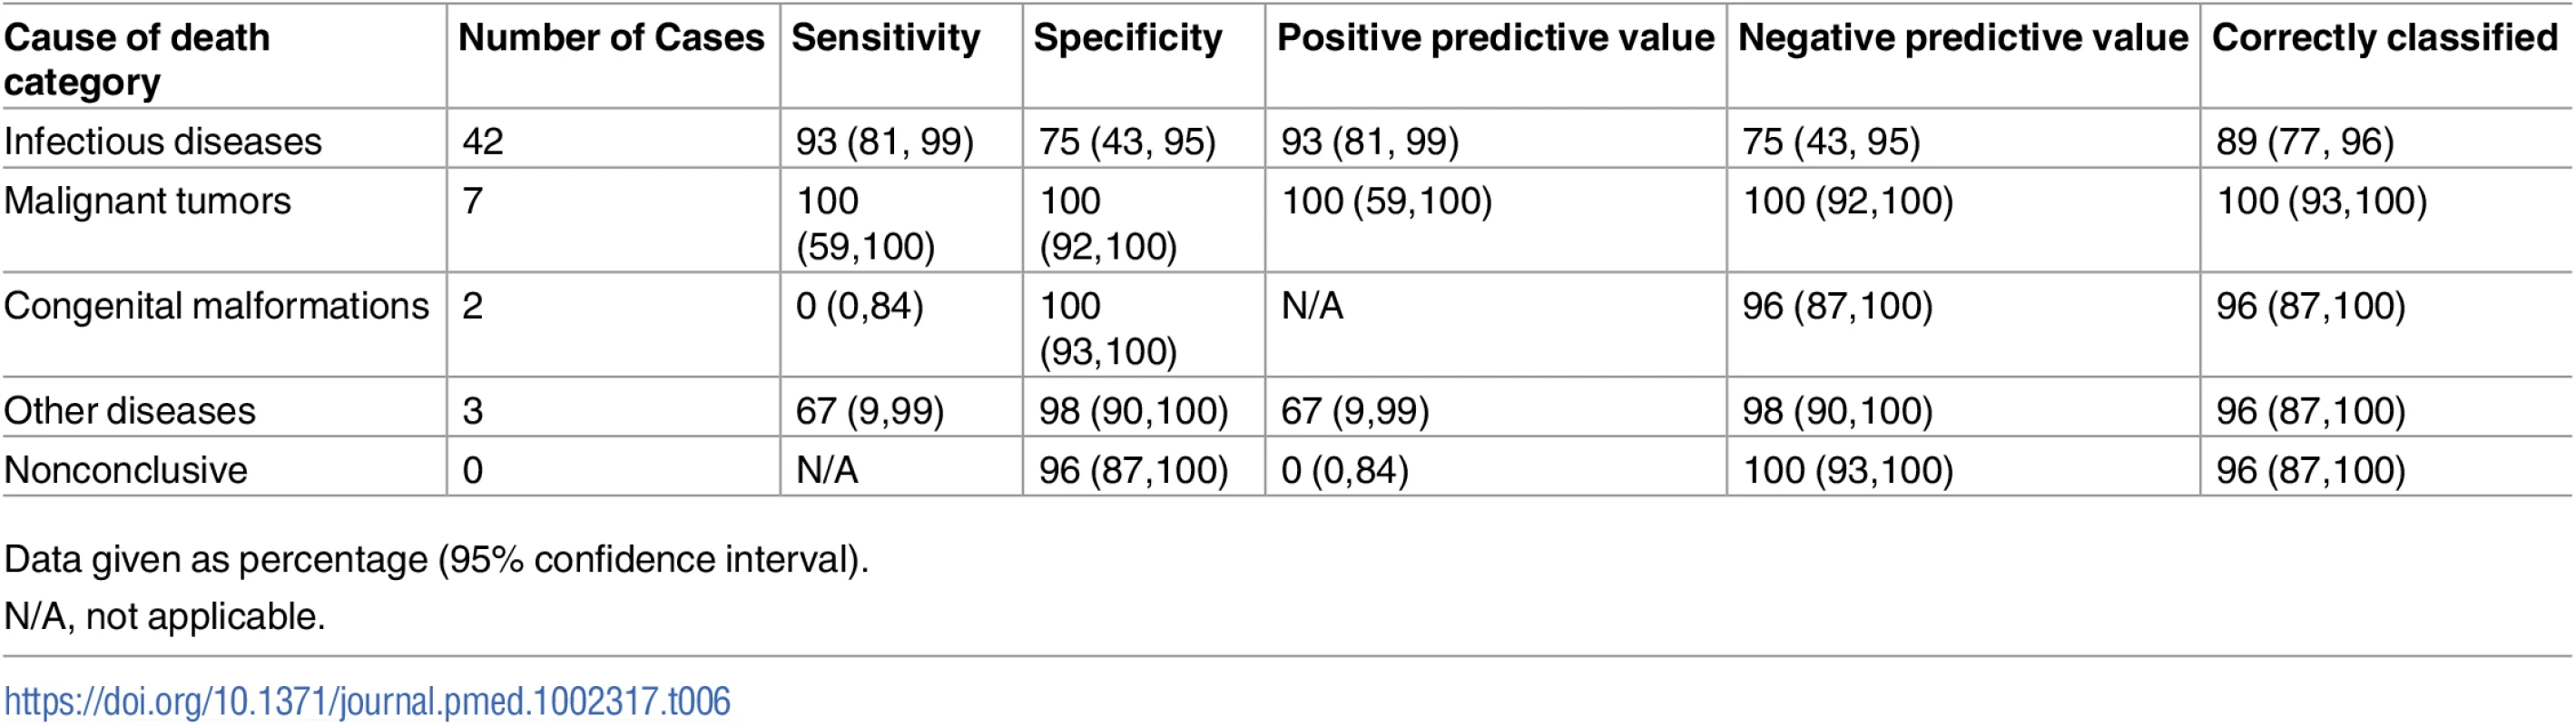 Sensitivity, specificity, positive and negative predictive values, and accuracy of the minimally invasive autopsy for the different cause of death categories in children.